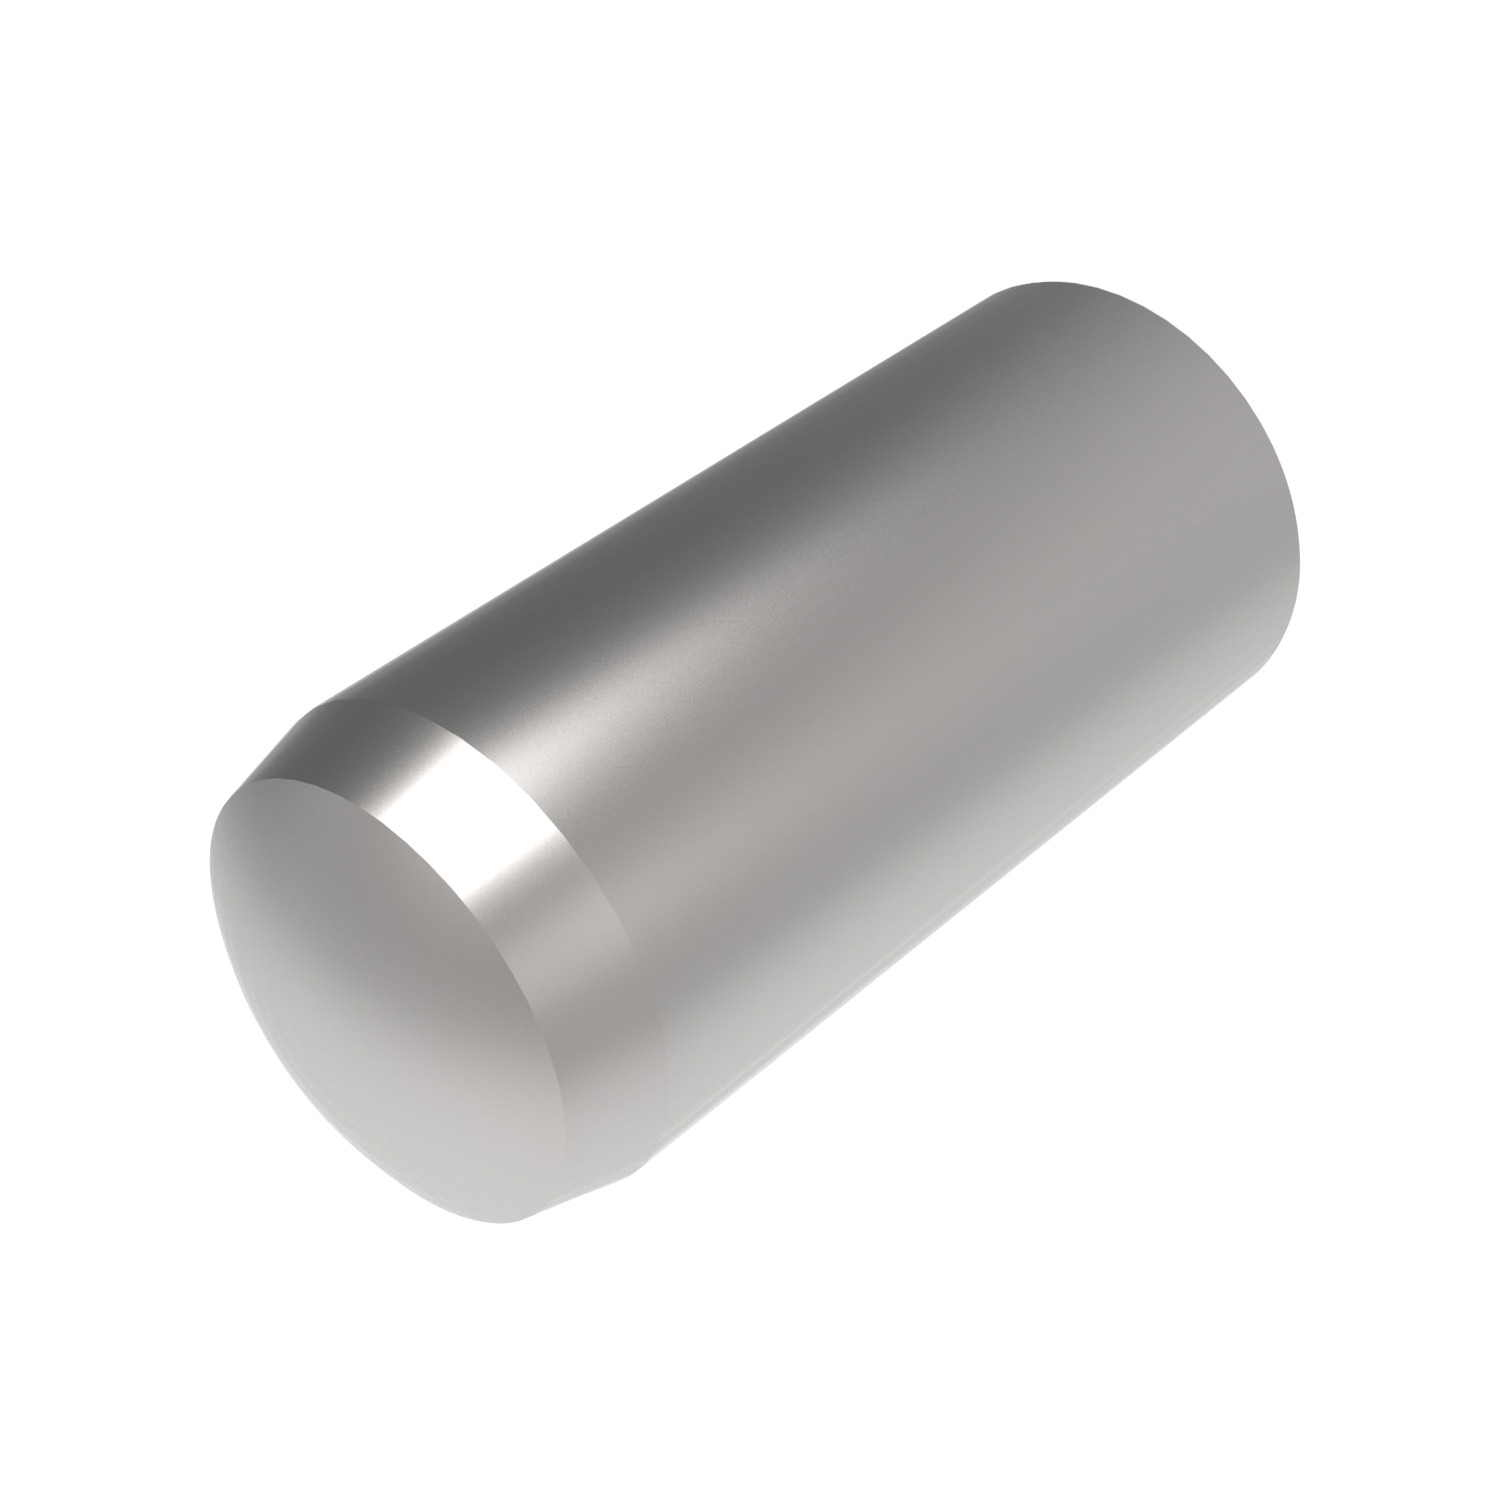 Product P1213, Stainless Extractable Dowel Pins with air release / 